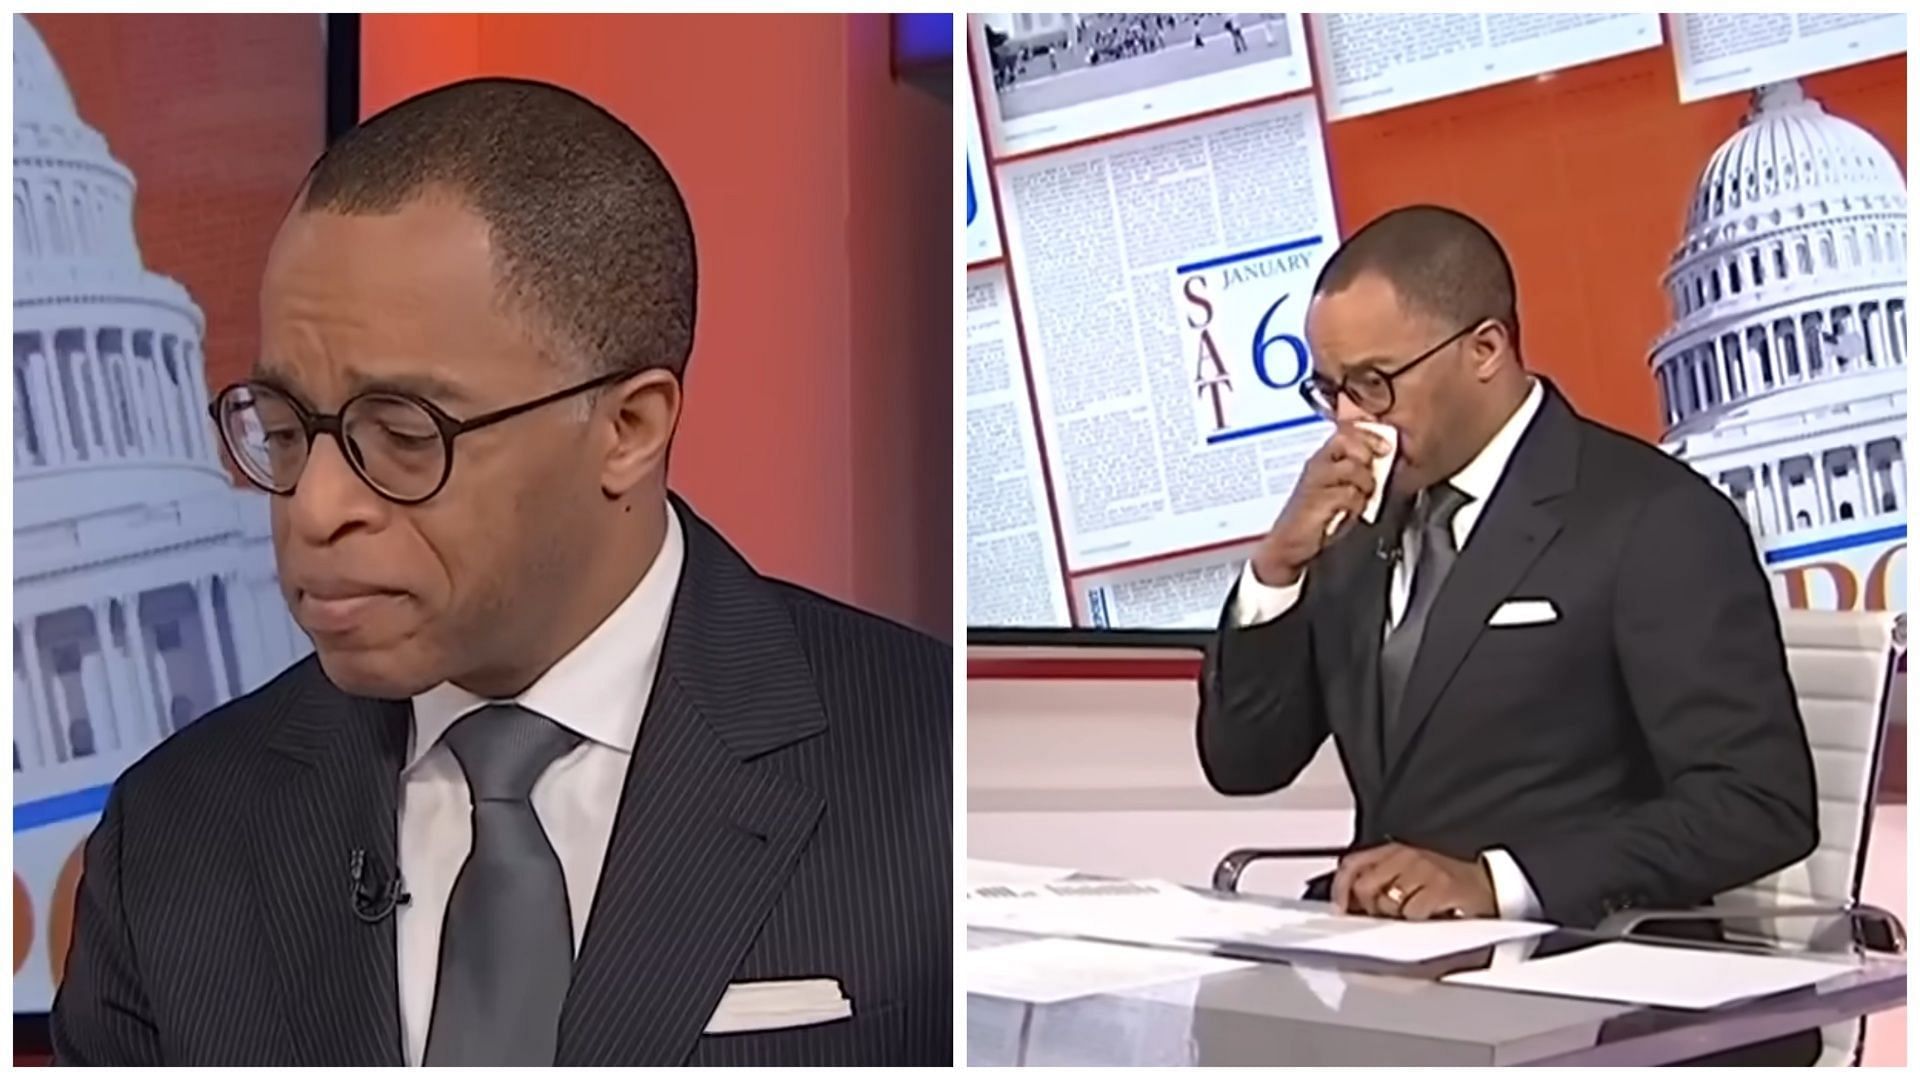 “Pathetic acting”: Internet calls out MSNBC host Jonathan Capehart for ...